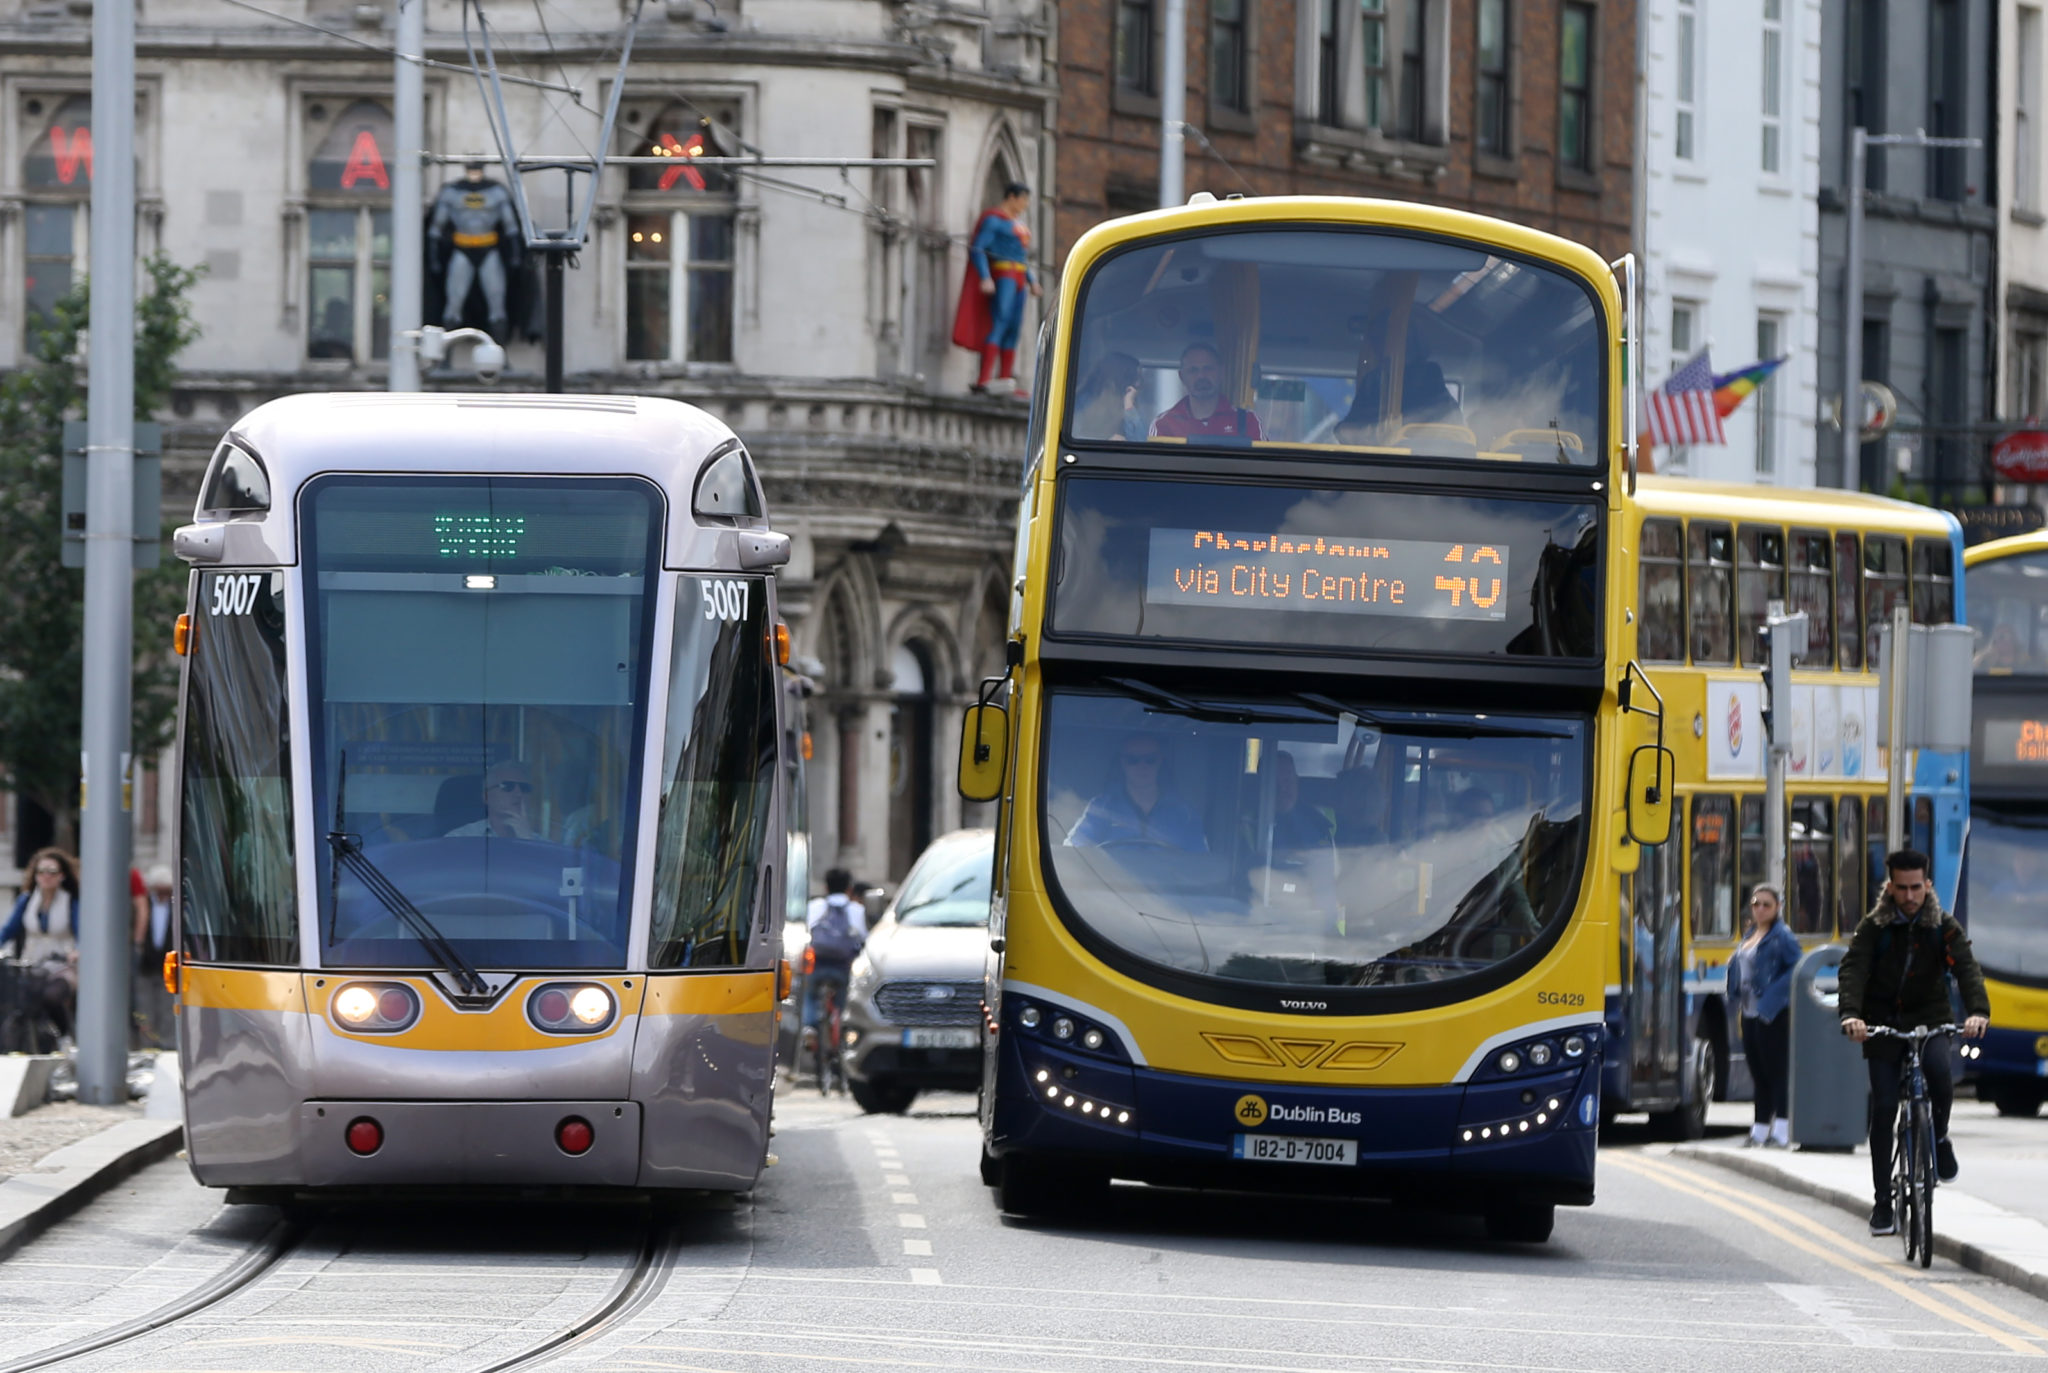 Luas trams beside a Dublin Bus, while a Cyclist passes by, in Dublin city Center